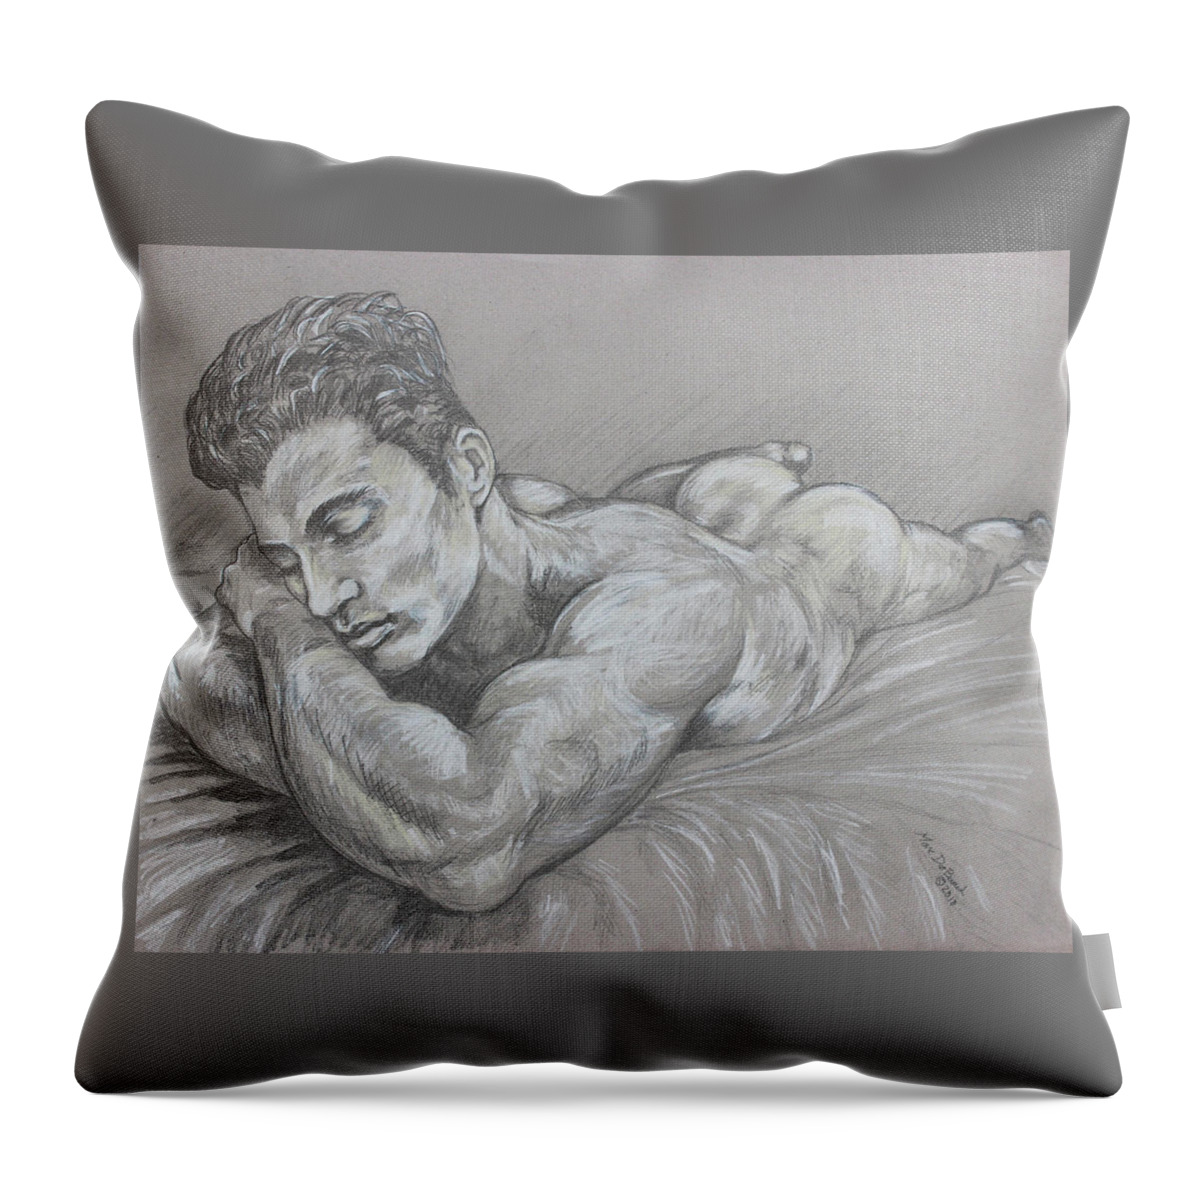 Male Nude Throw Pillow featuring the painting Resting Nude by Marc DeBauch